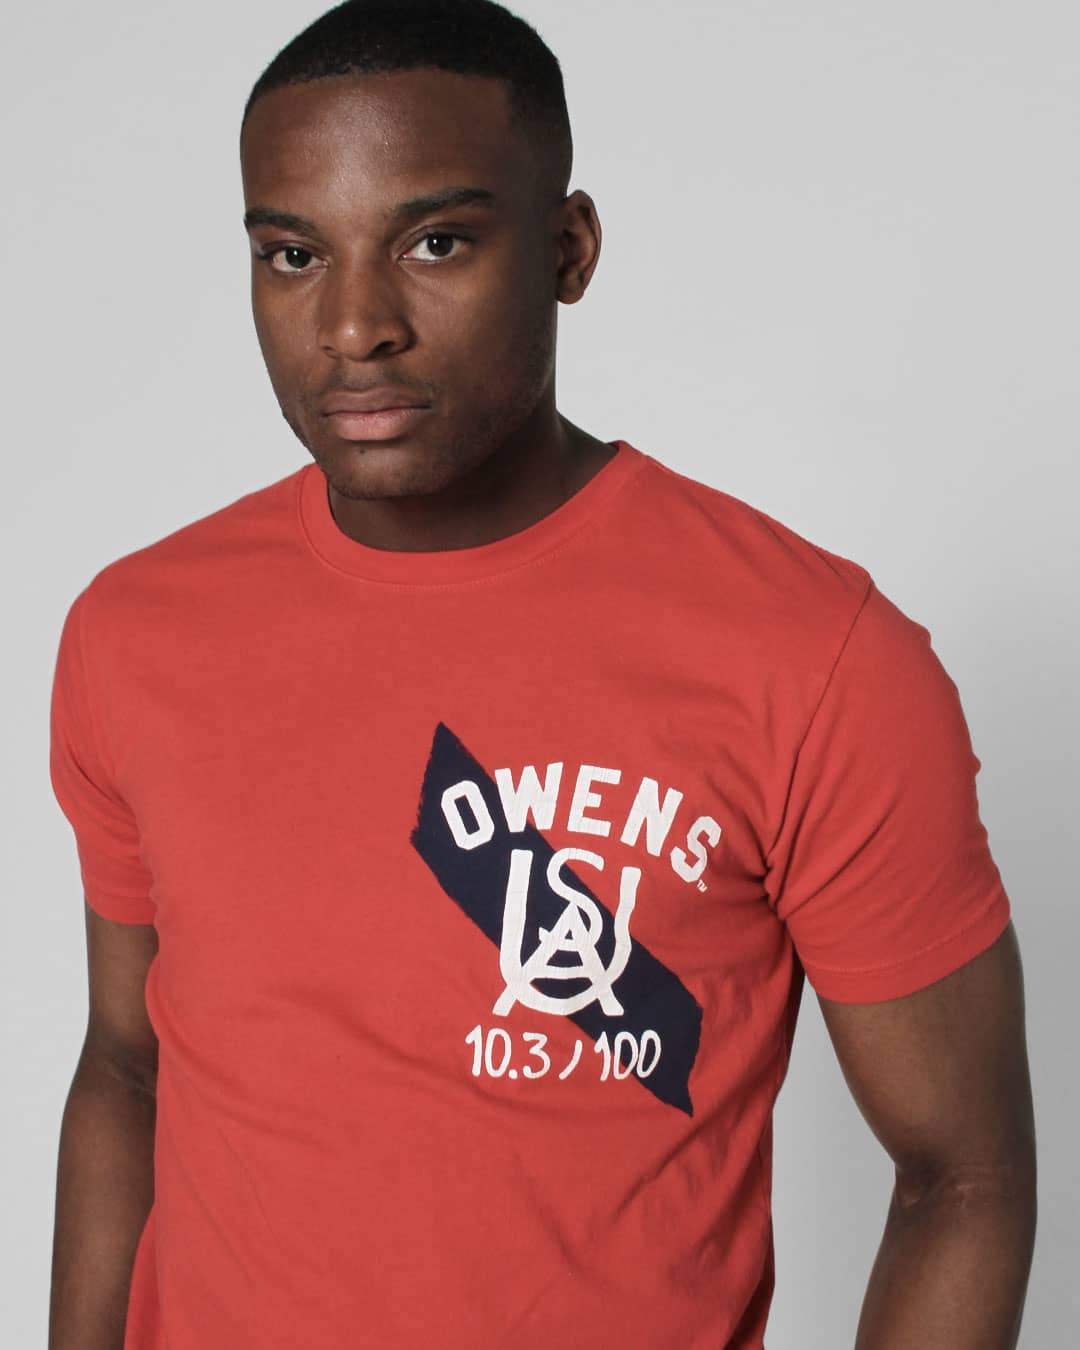 Jesse Owens Ground Breakers Red Tee - Roots of Inc dba Roots of Fight